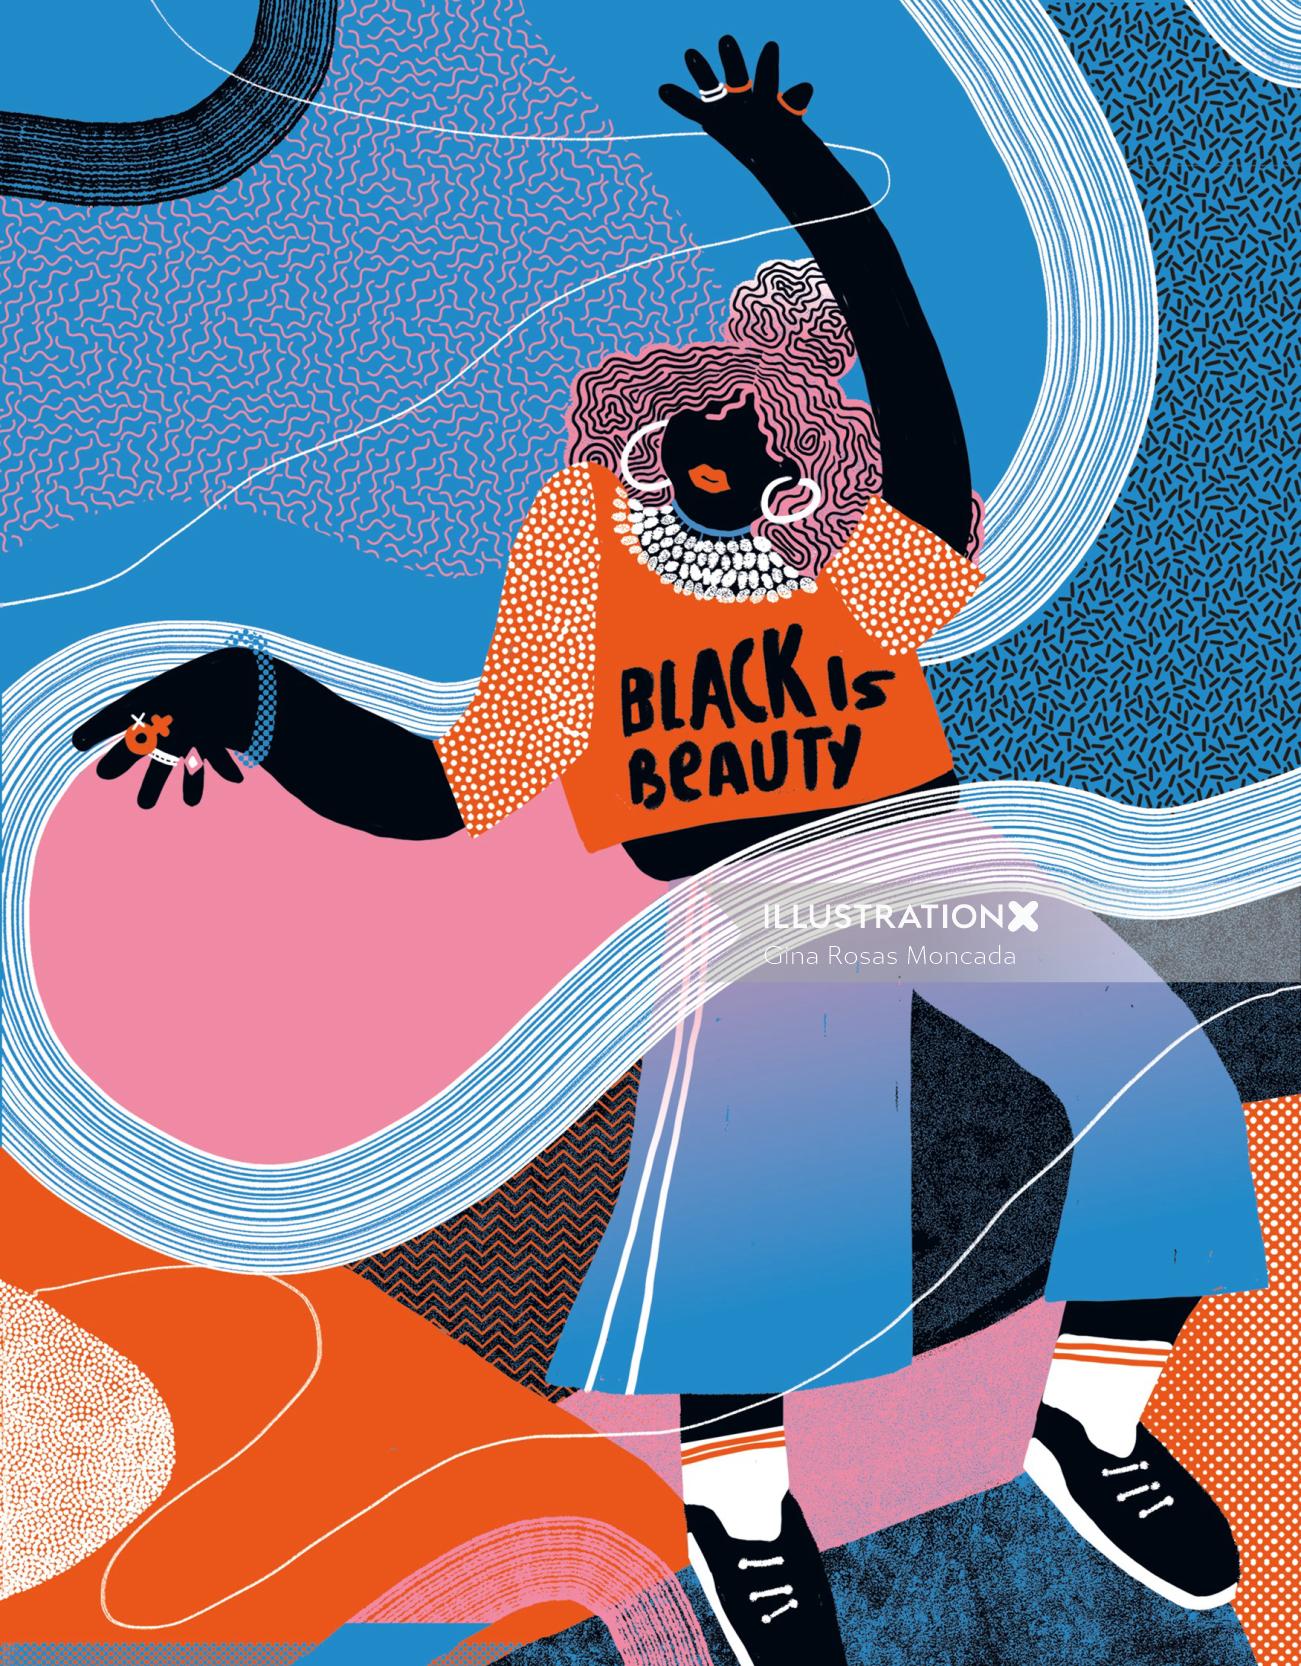 Conceptual illustration of black is beauty 